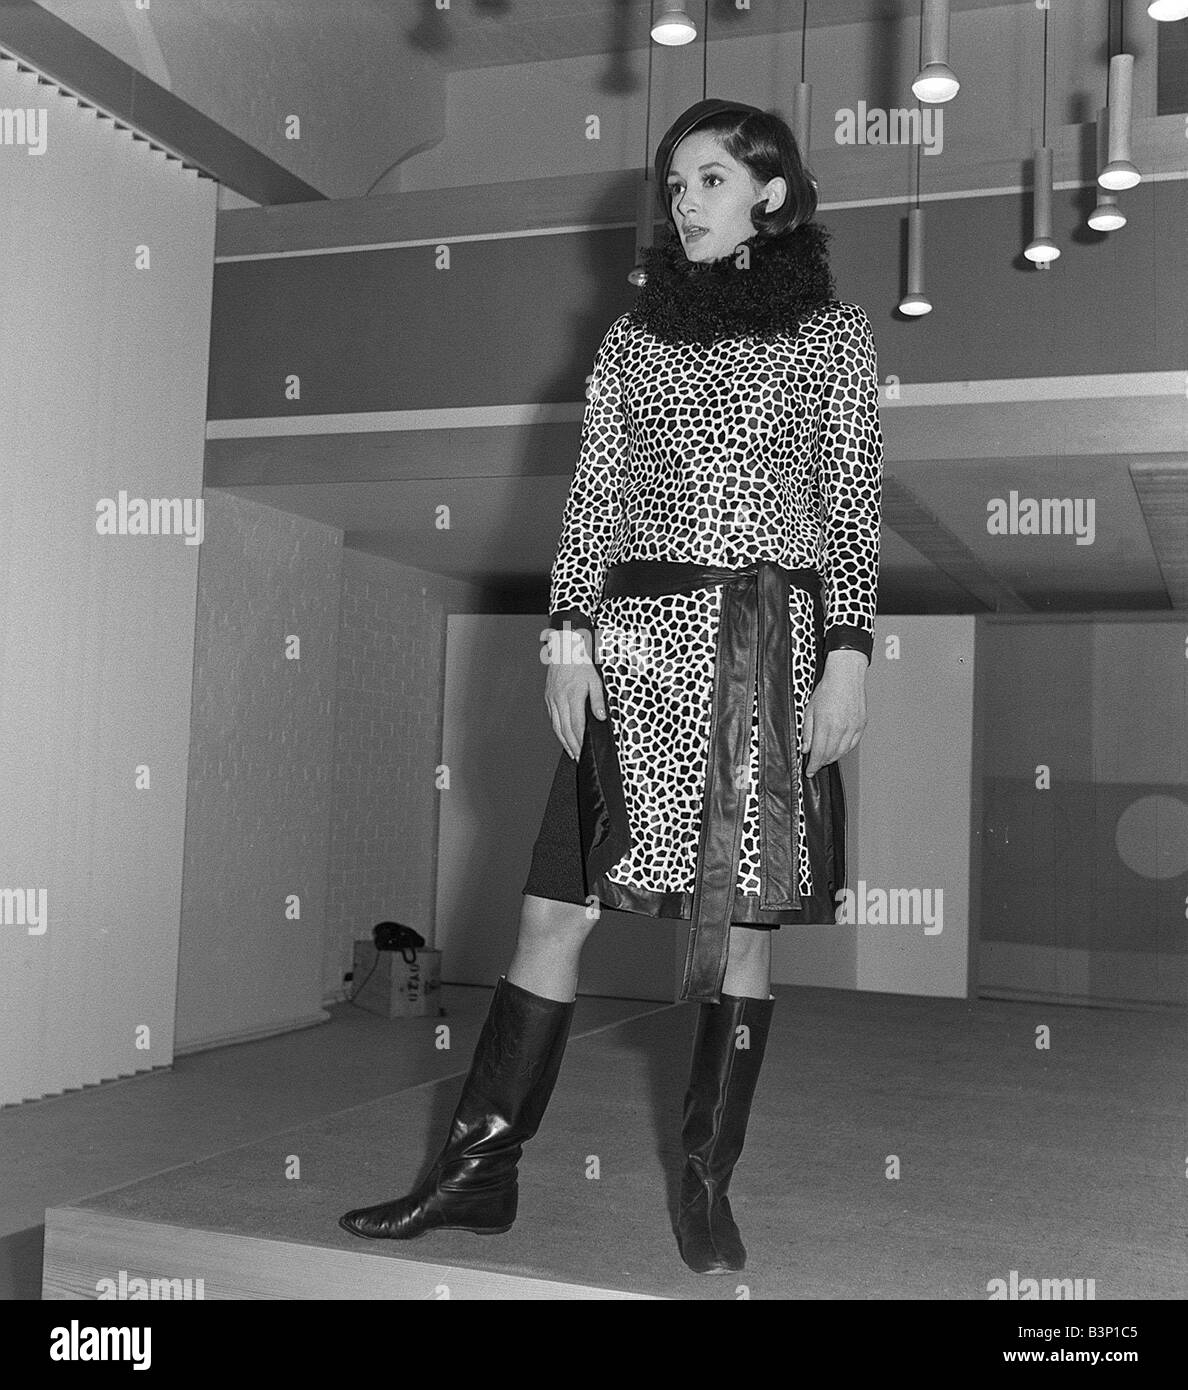 Mary Quant fashion clothing Wearing a leopard print dress with fur collar and knee high boots looking bored annoyed Stock Photo